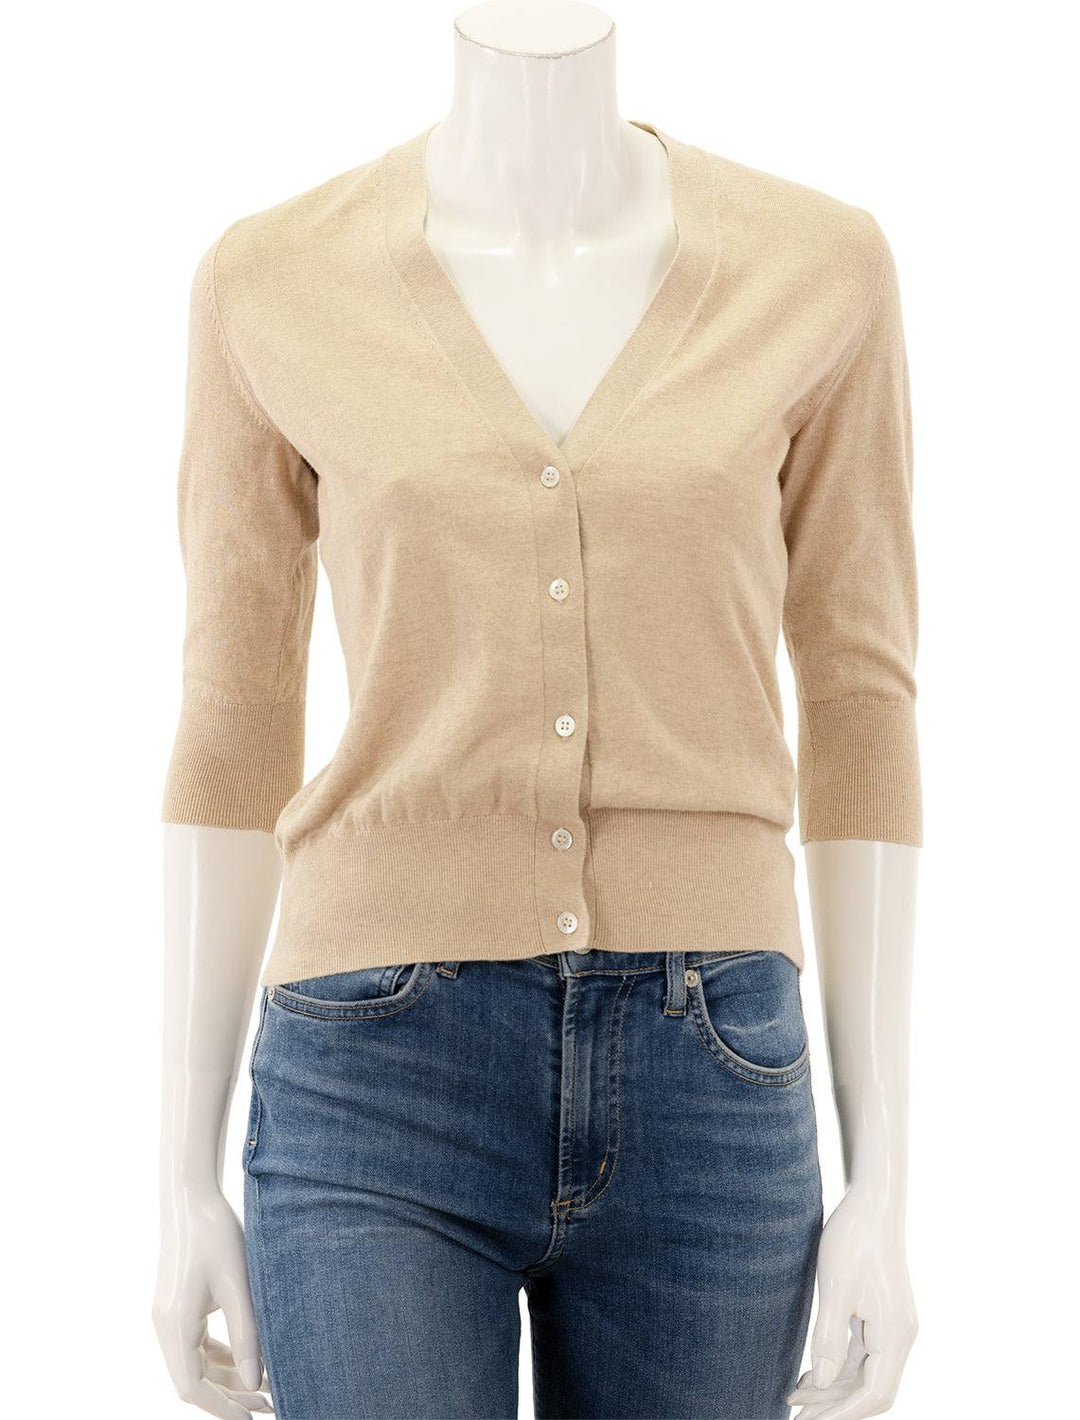 Front view of Ann Mashburn's rosie v-neck sweater in sable.